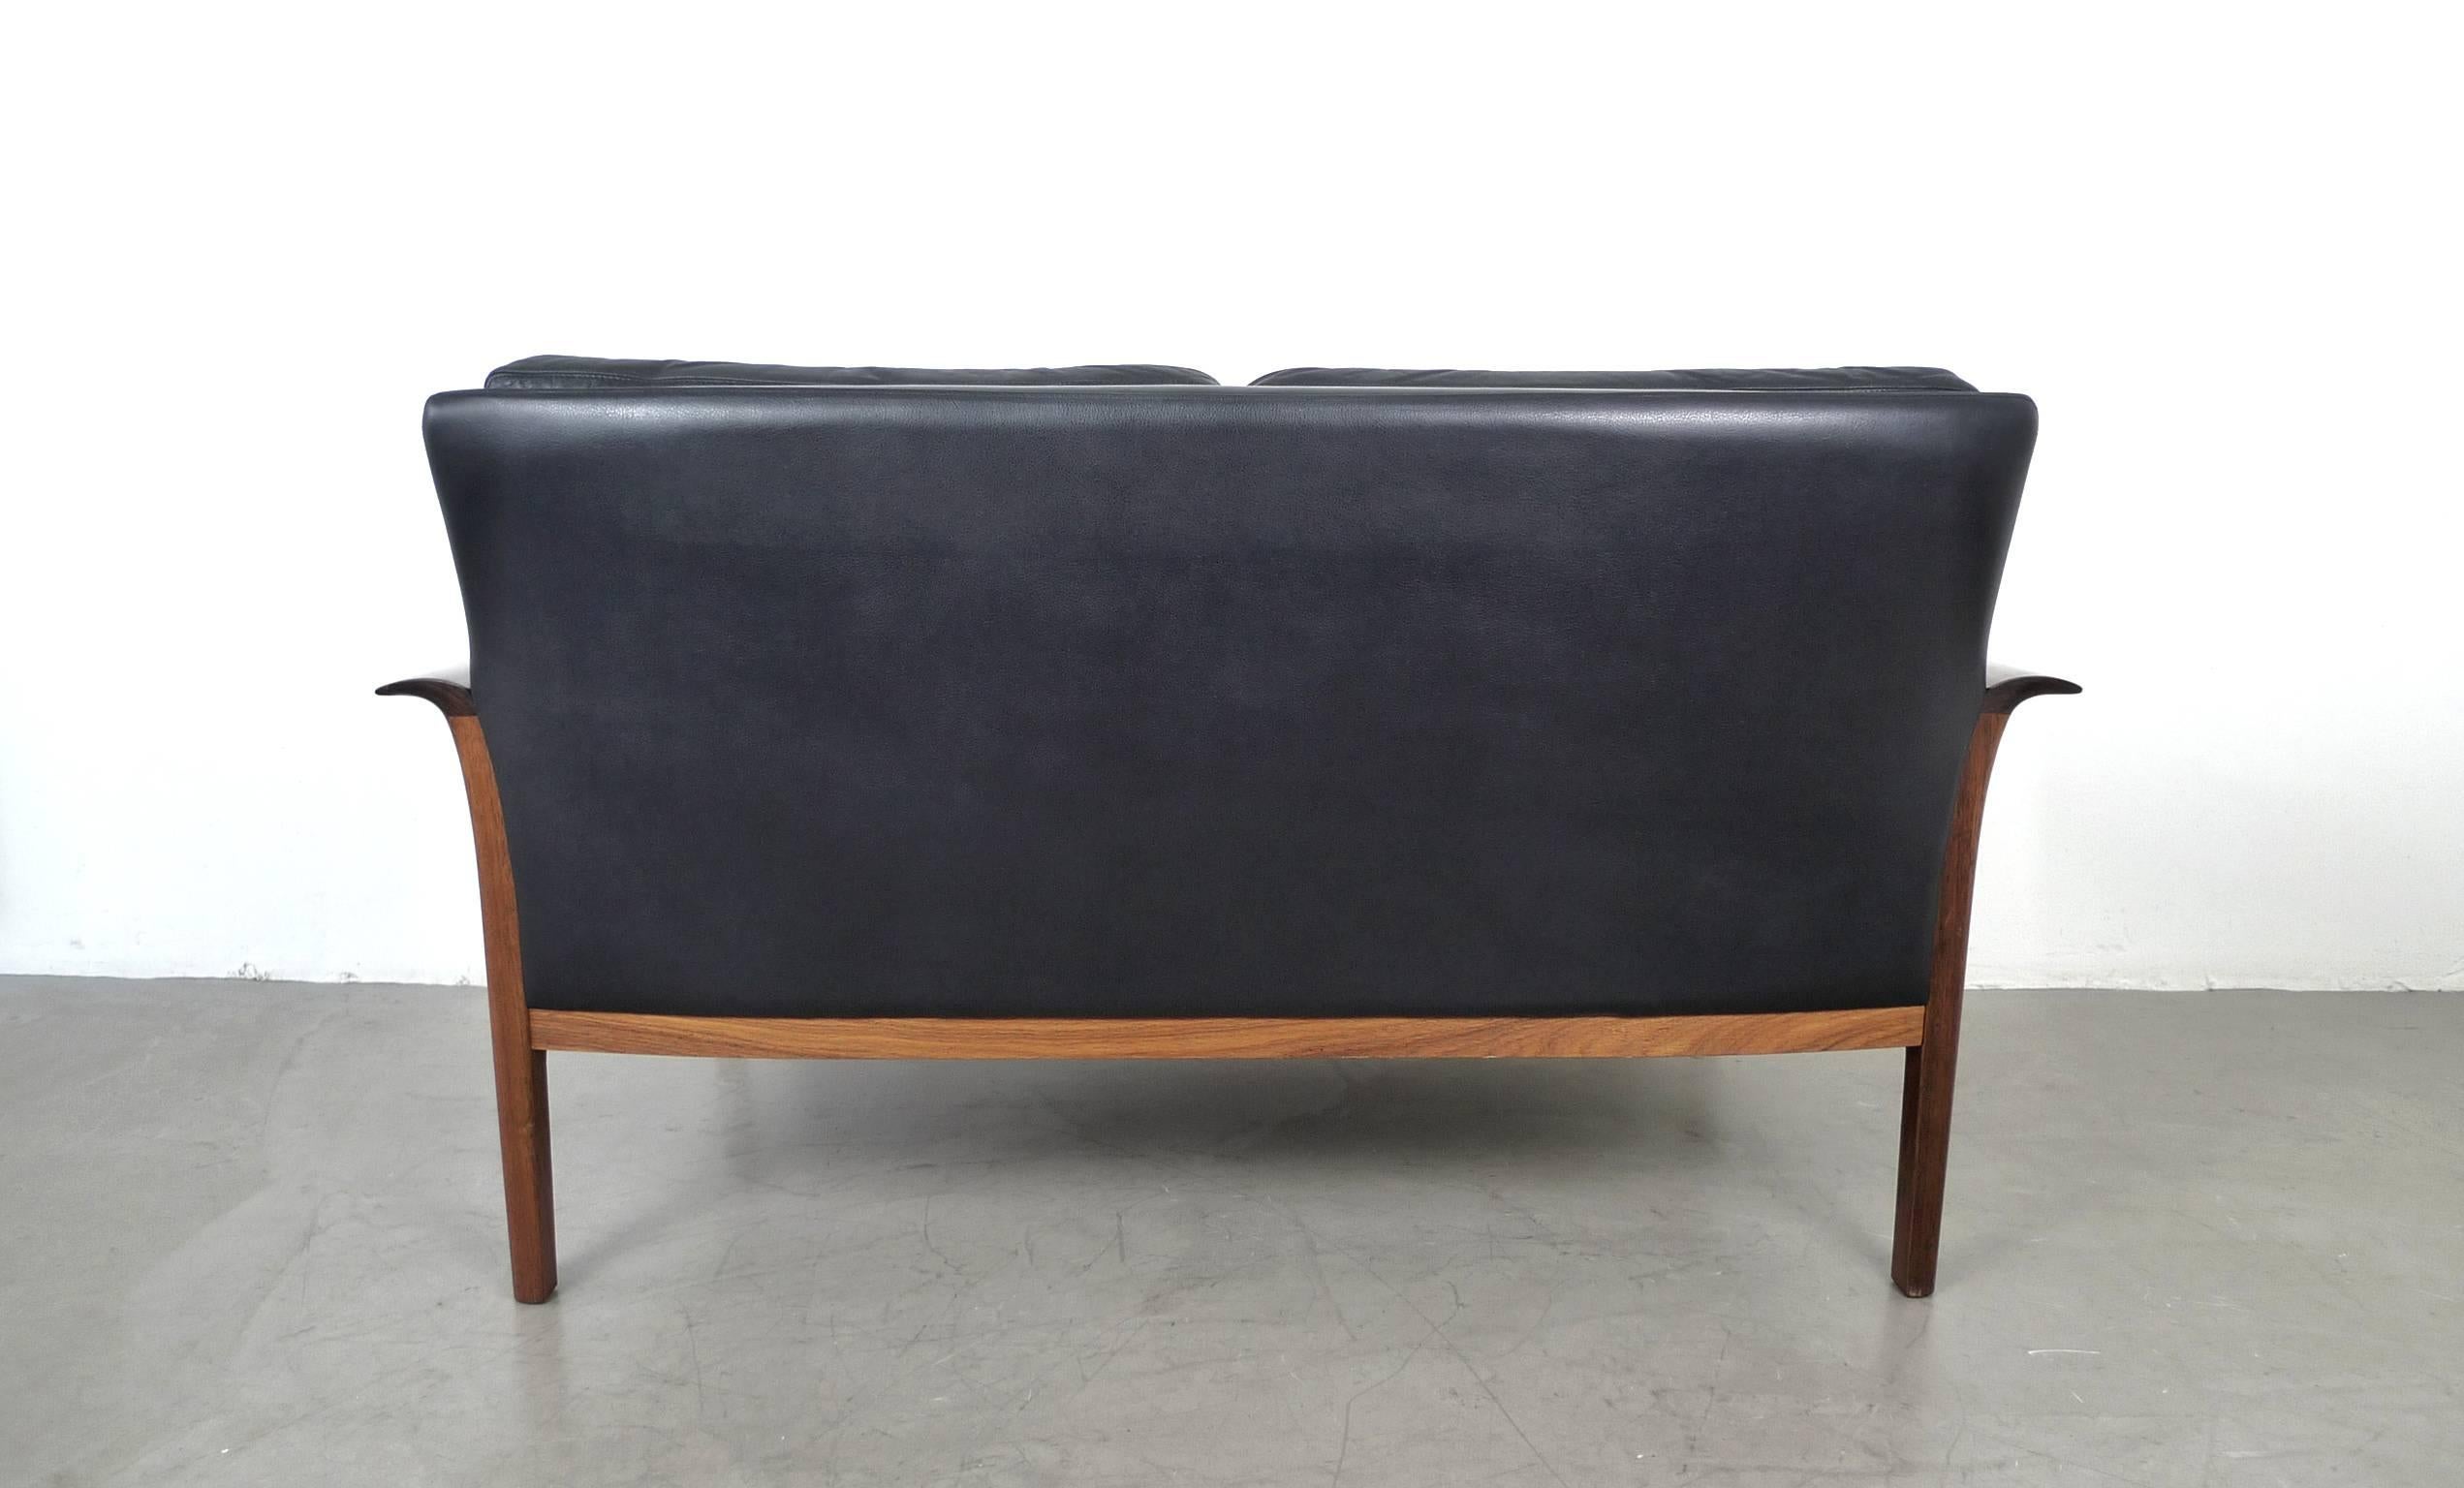 20th Century Two-Seat Sofa by Knut Saeter for Vatne Mobler, Norway, 1960s